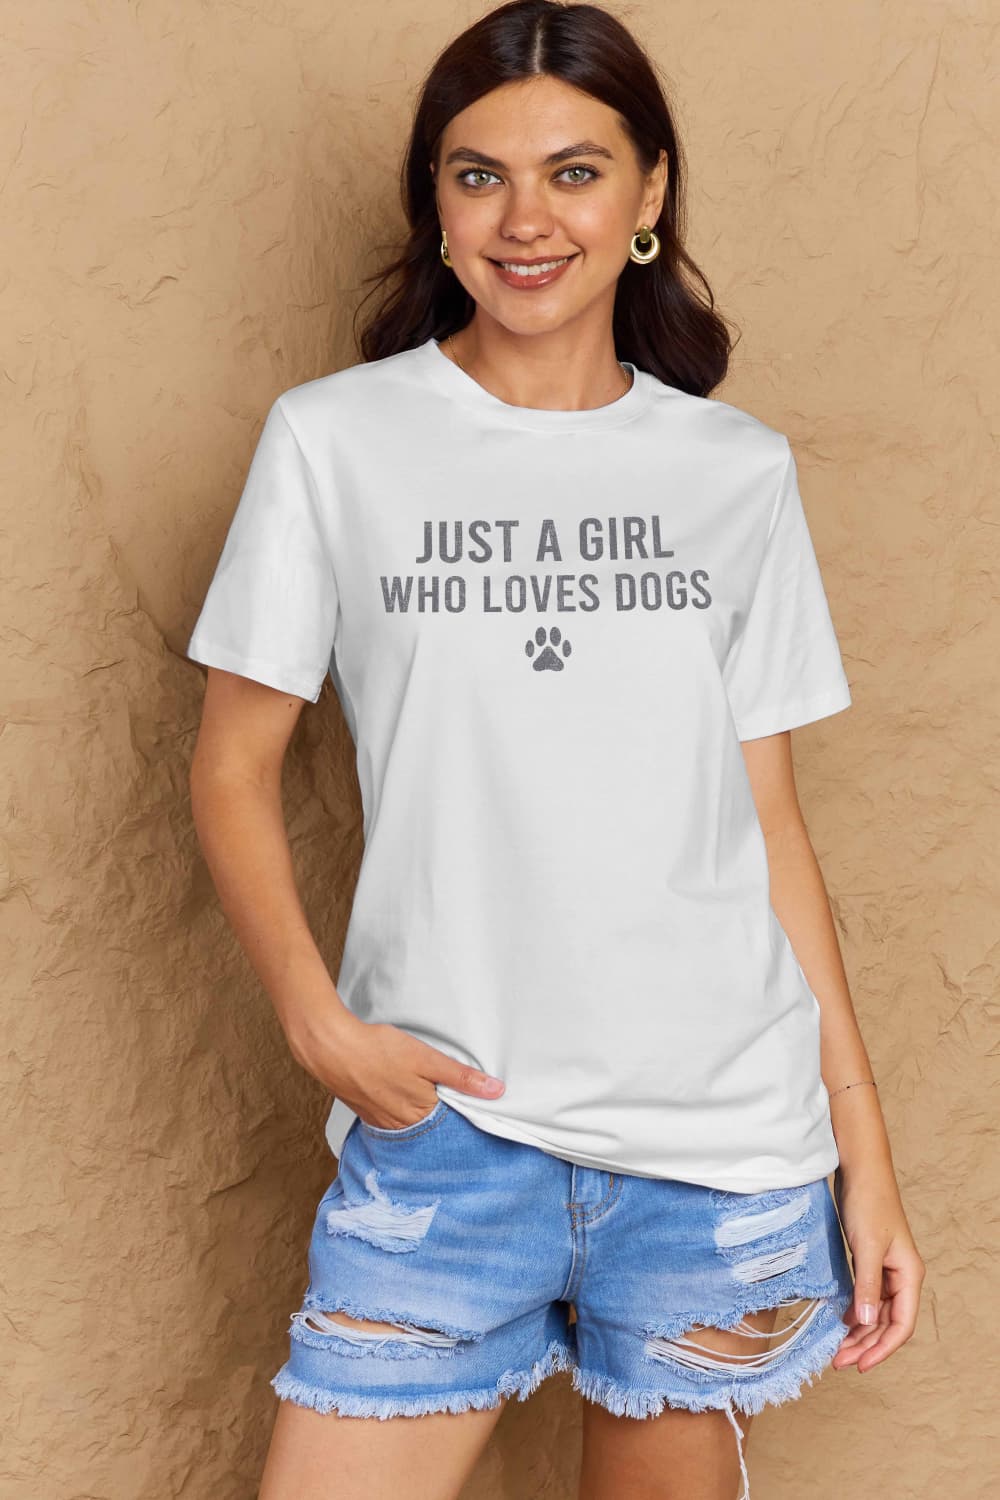 Simply Love Full Size Dog Paw Graphic Cotton T-Shirt - Sybaritic Bags & Clothing